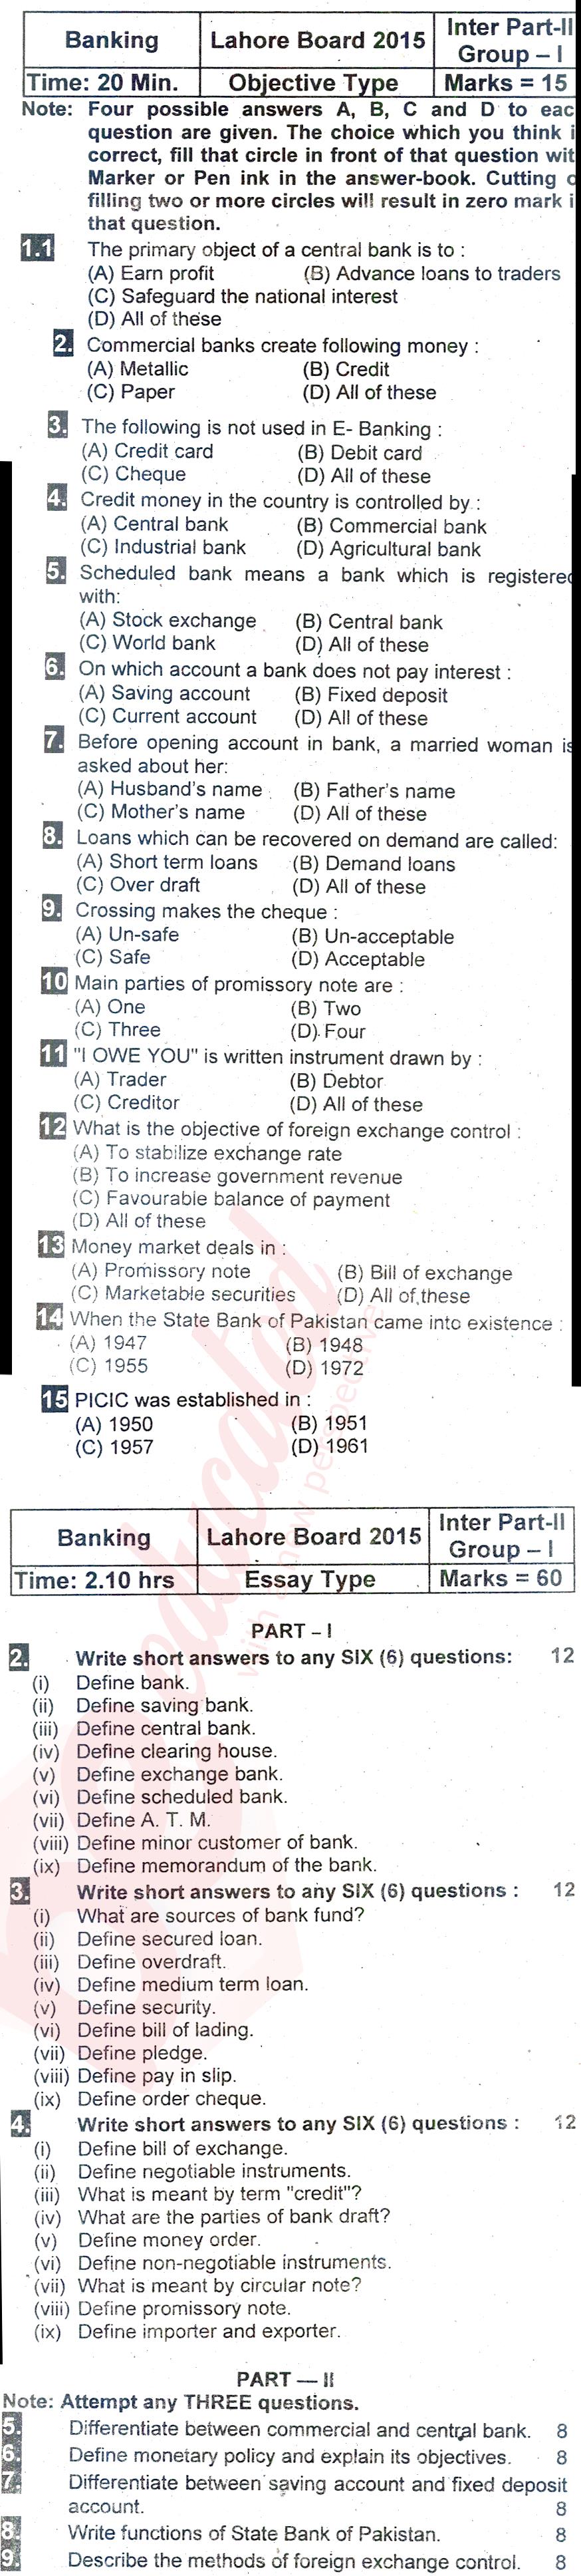 Principles of Banking ICOM Part 2 Past Paper Group 1 BISE Lahore 2015